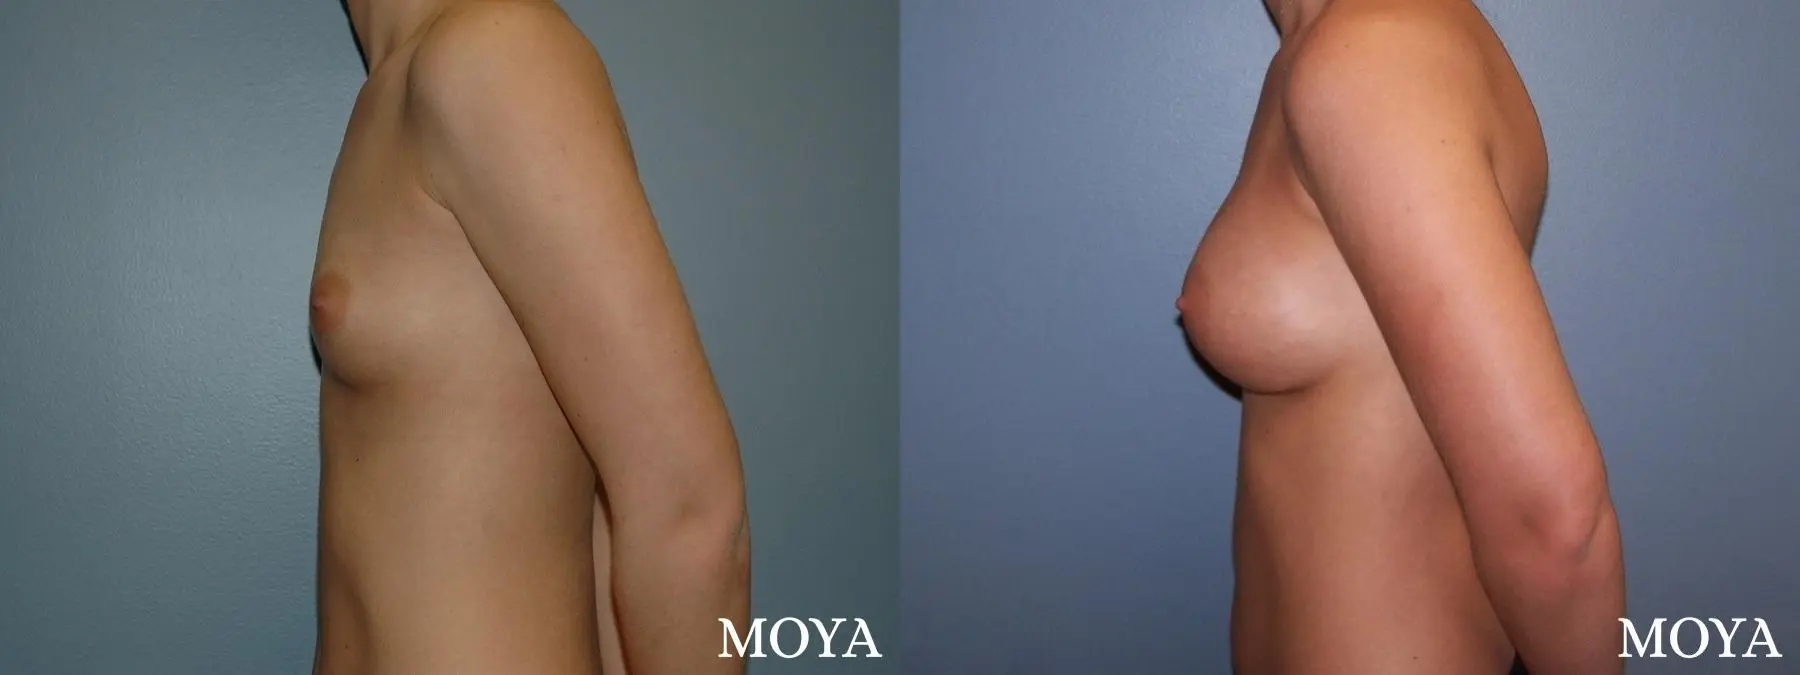 Breast Augmentation: Patient 6 - Before and After 2